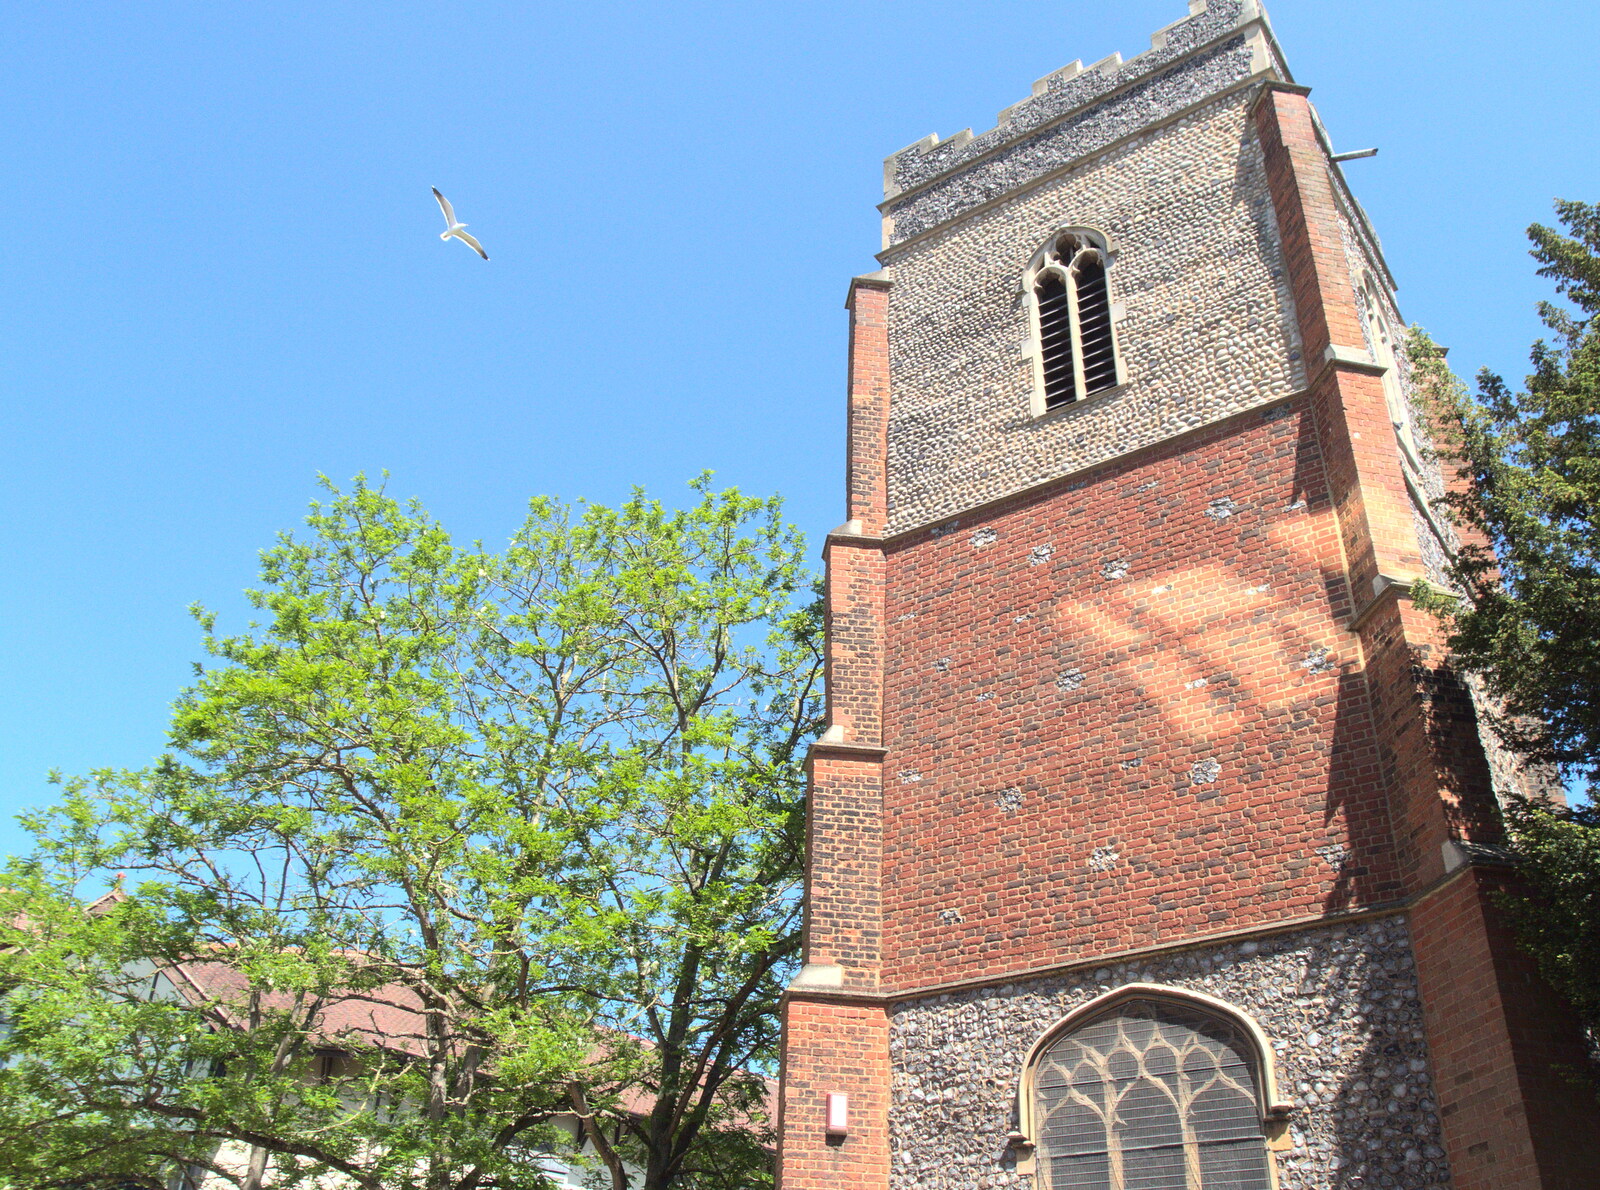 St. Stephen's church, opposite the Buttermarket from Badders, Bike Rides and a Birthday, Suffolk - 26th May 2017